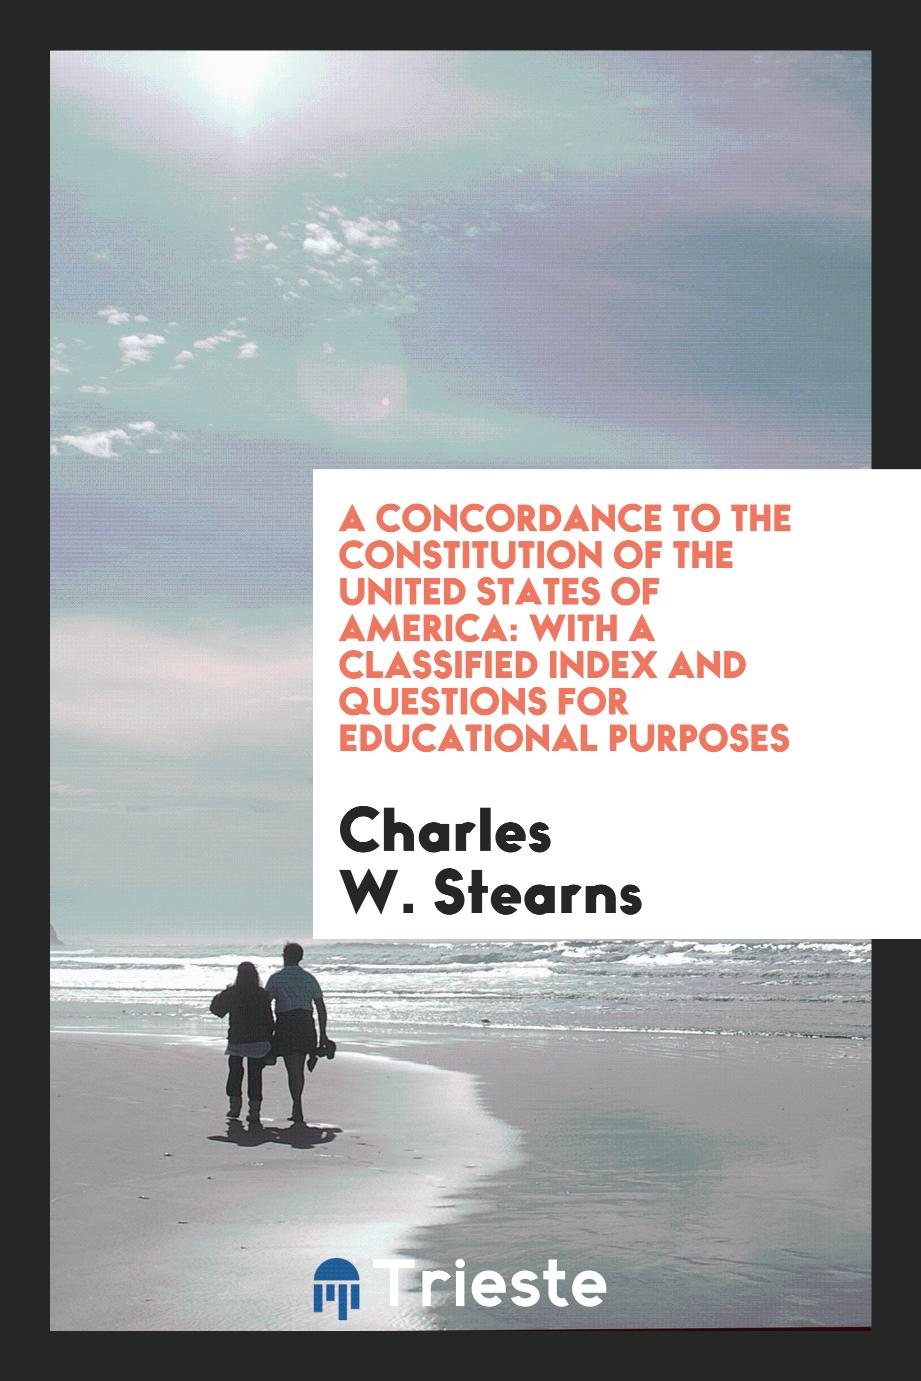 A Concordance to the Constitution of the United States of America: With a Classified Index and Questions for Educational Purposes